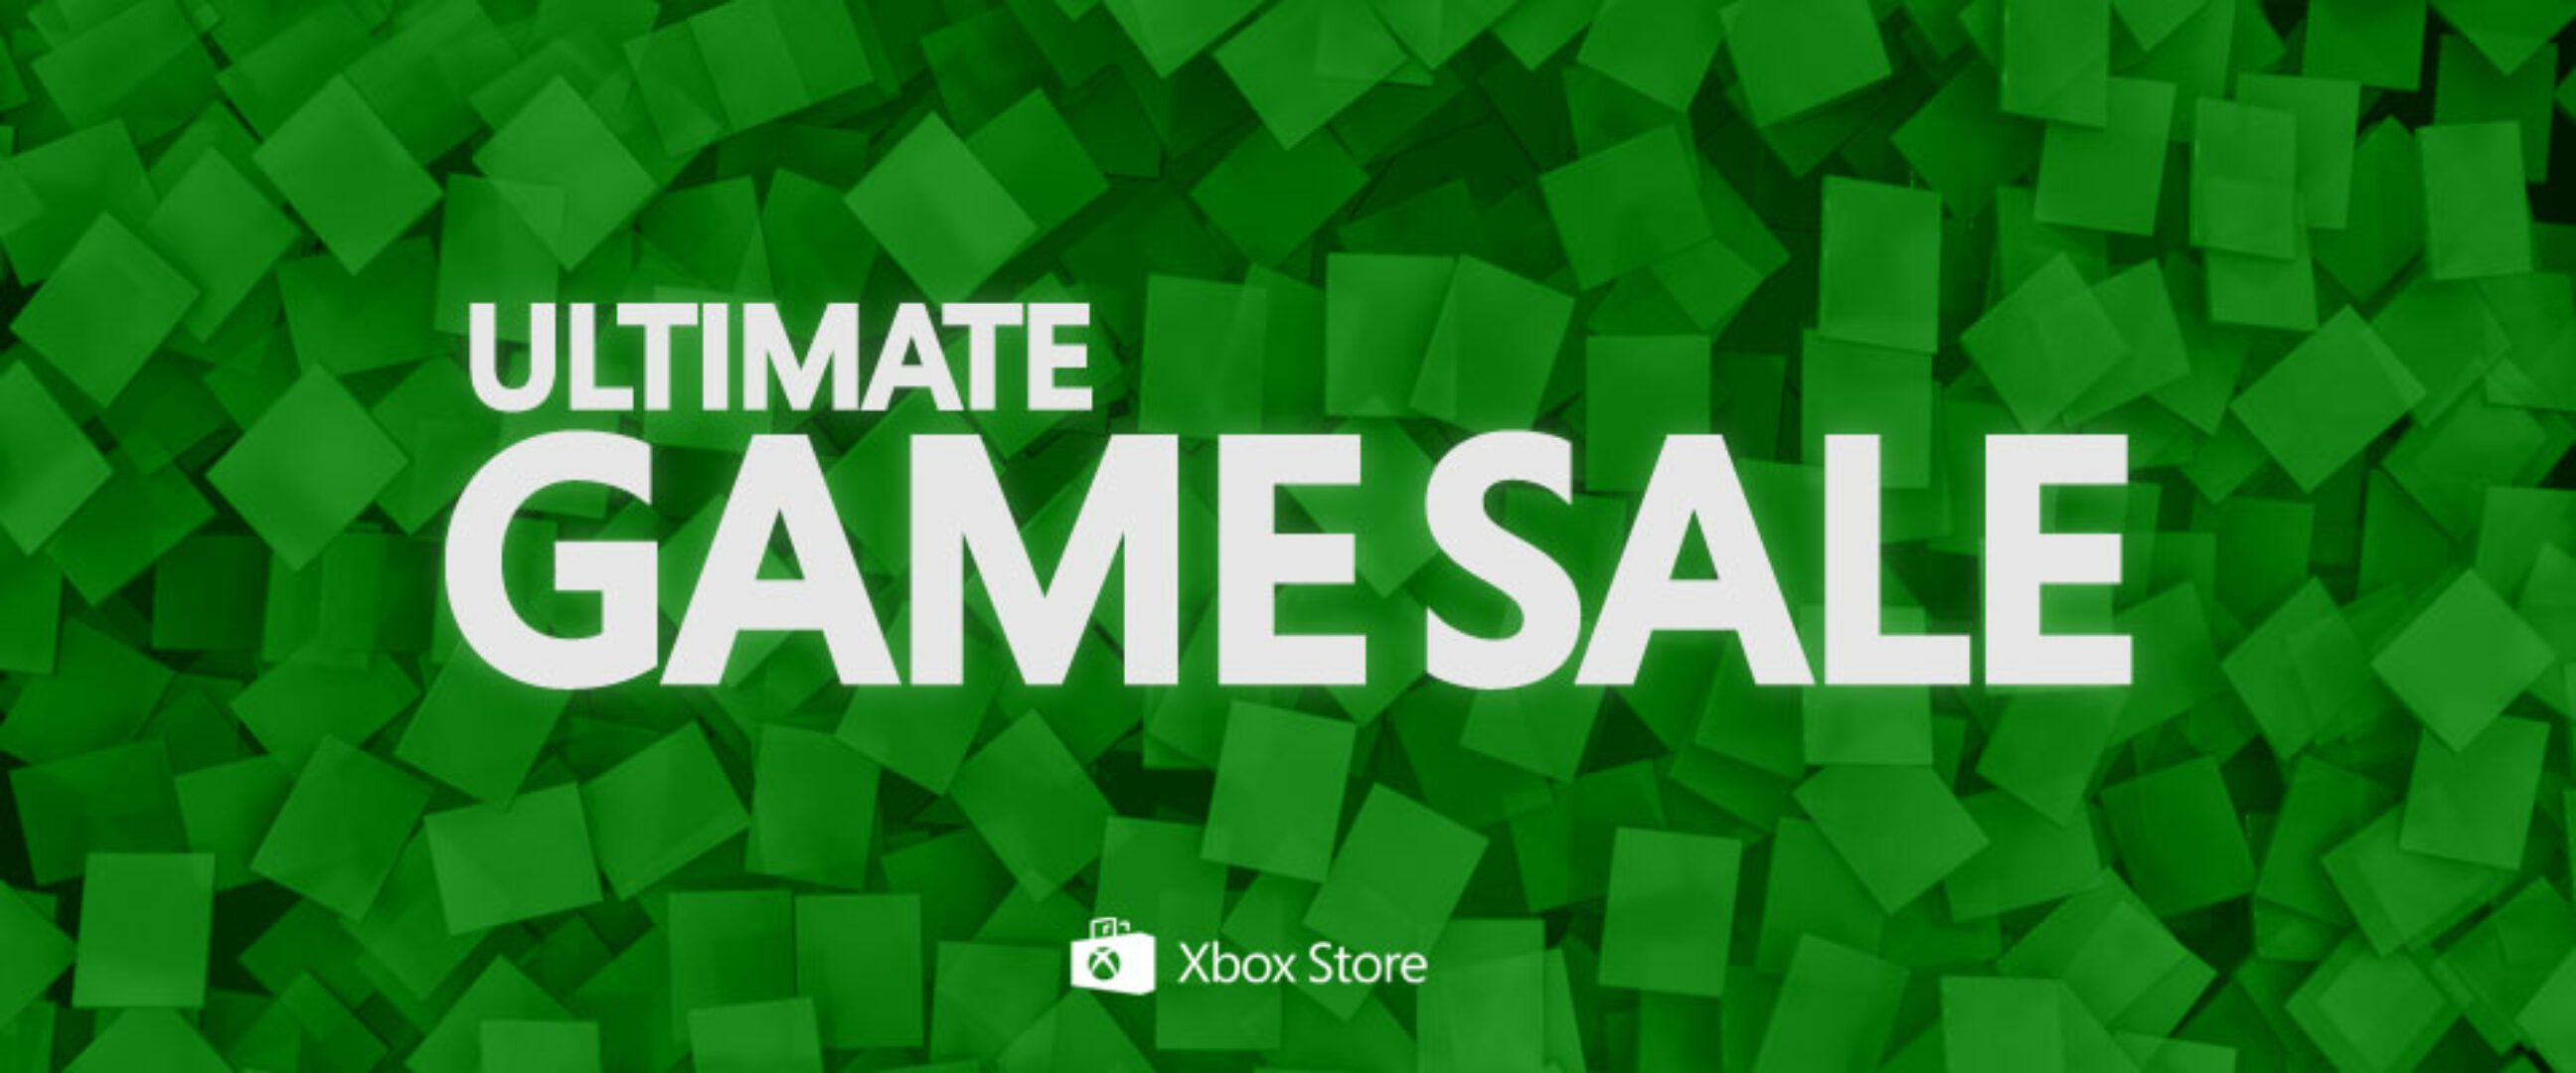 Top 5 Xbox One Games from the Ultimate Game Sale